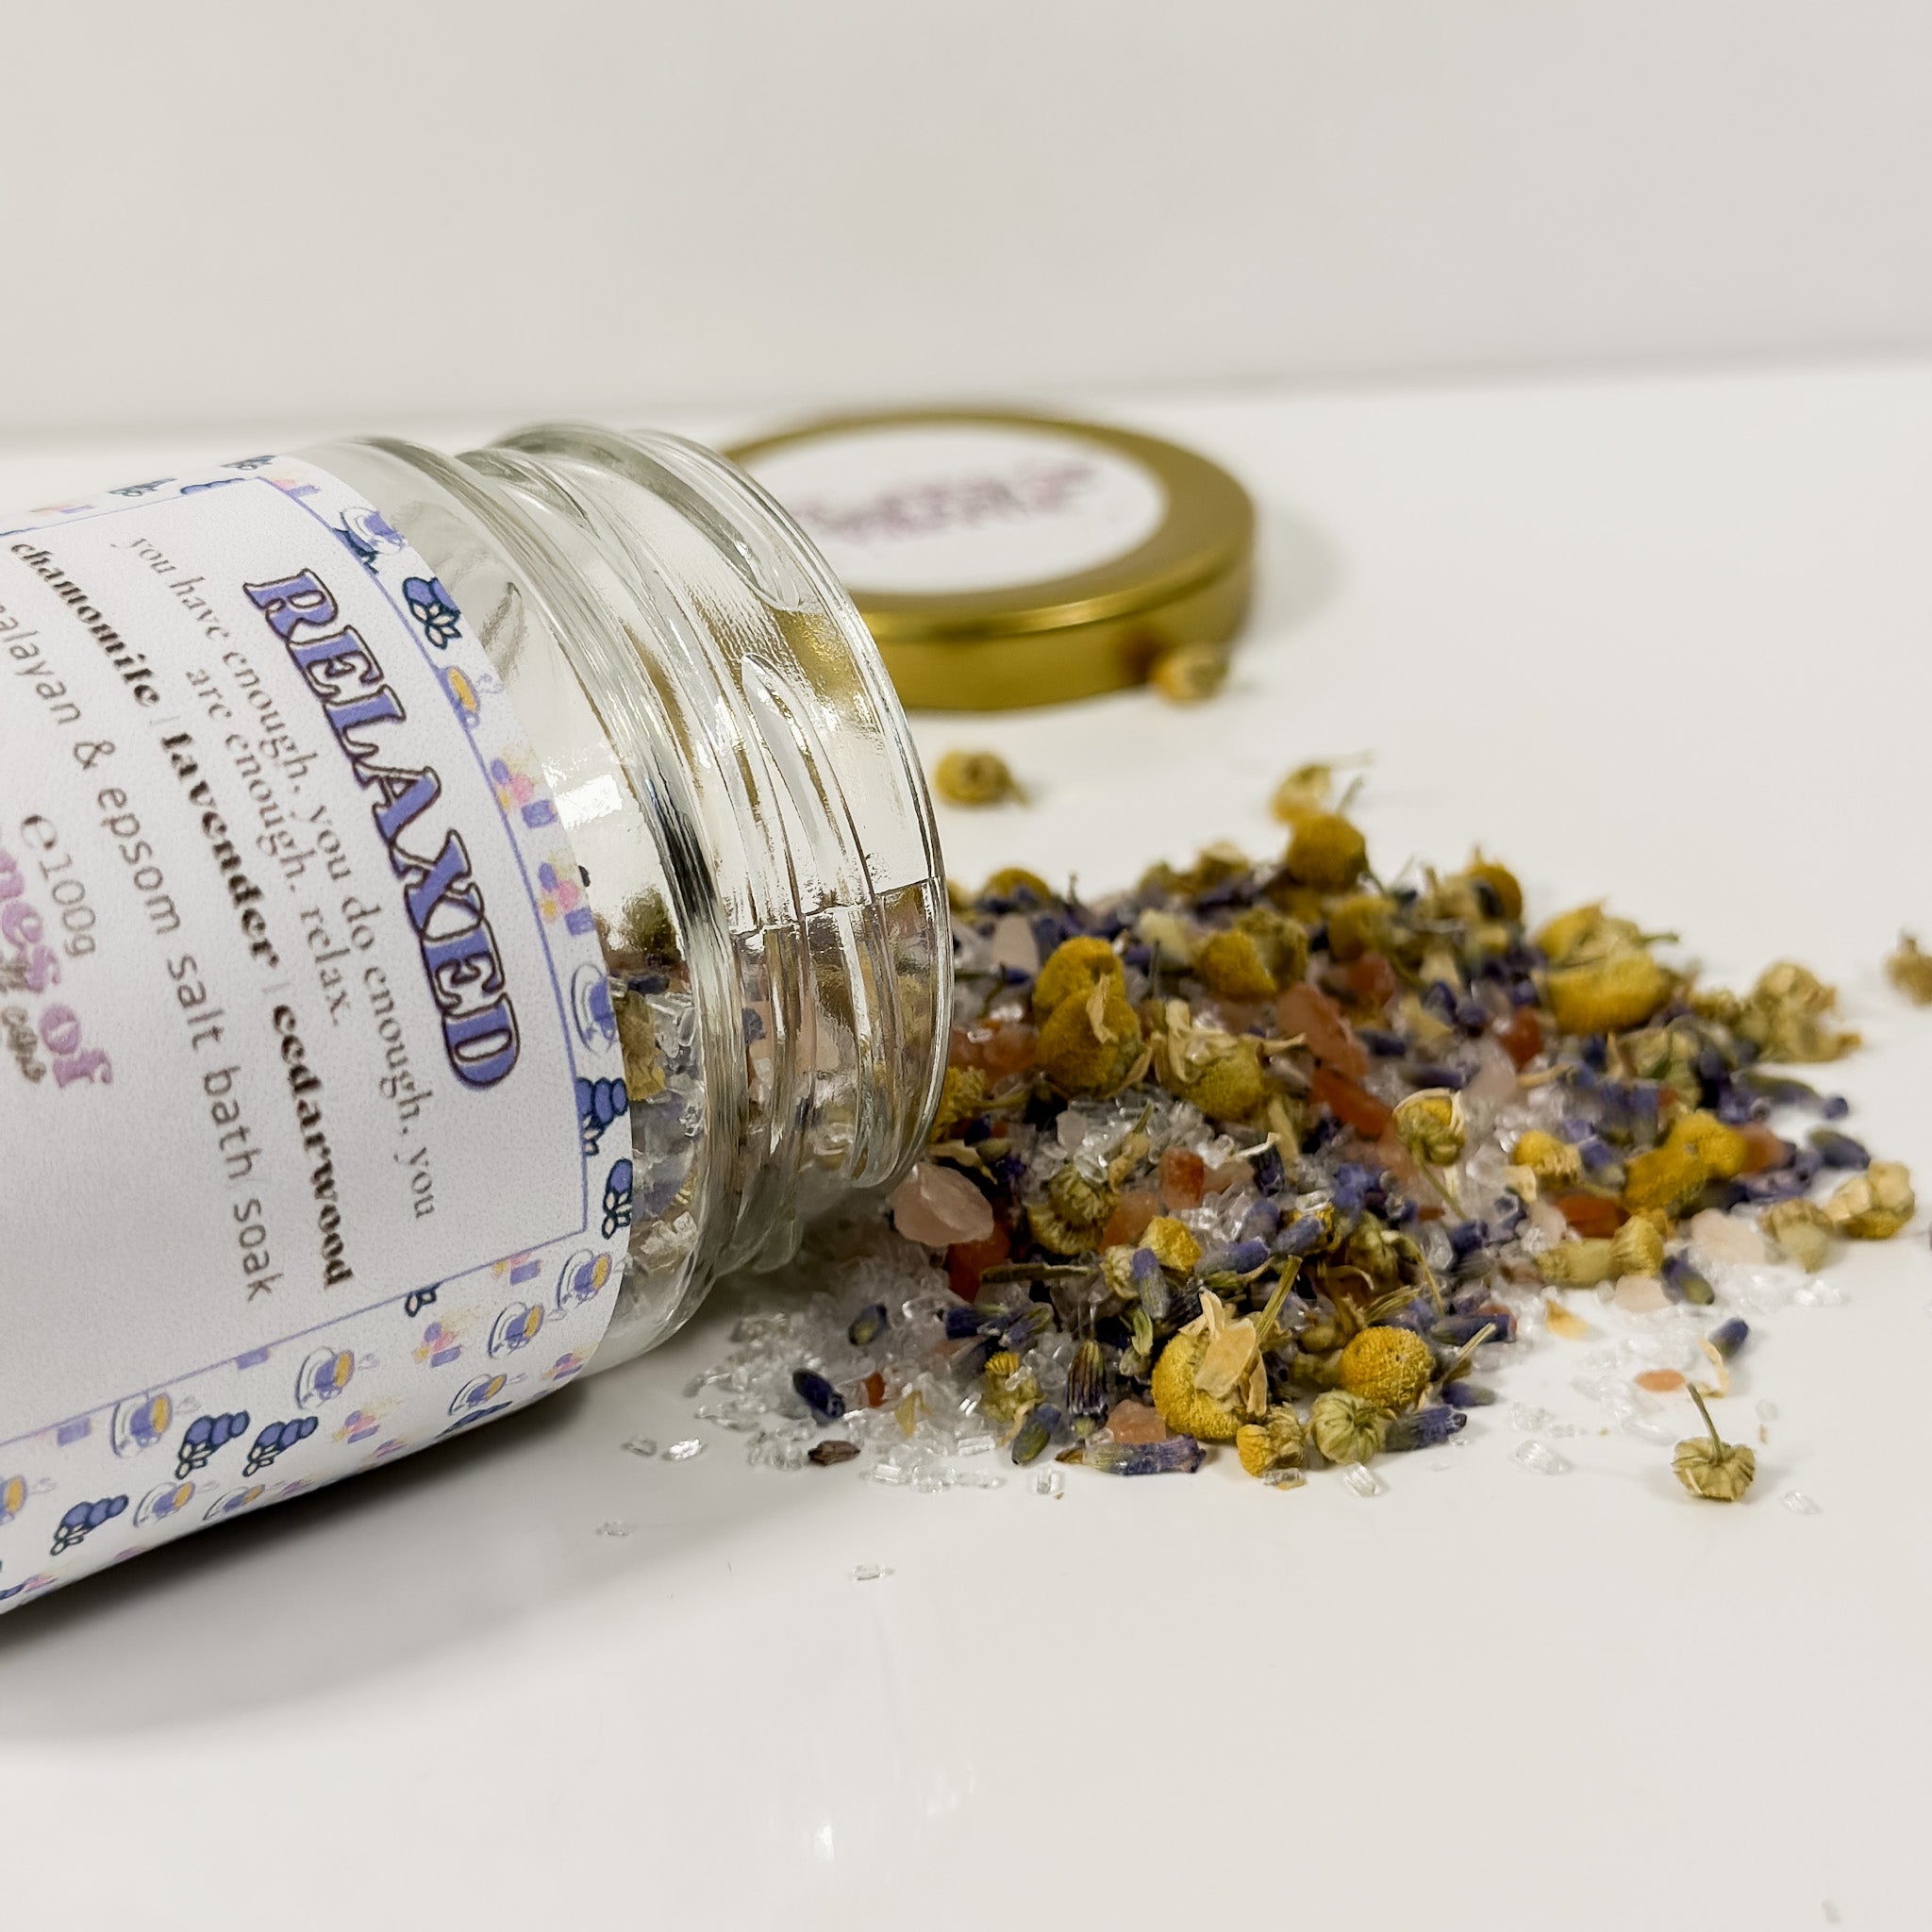 Relaxed - Relaxing/Anxiety Relief Bath Soak